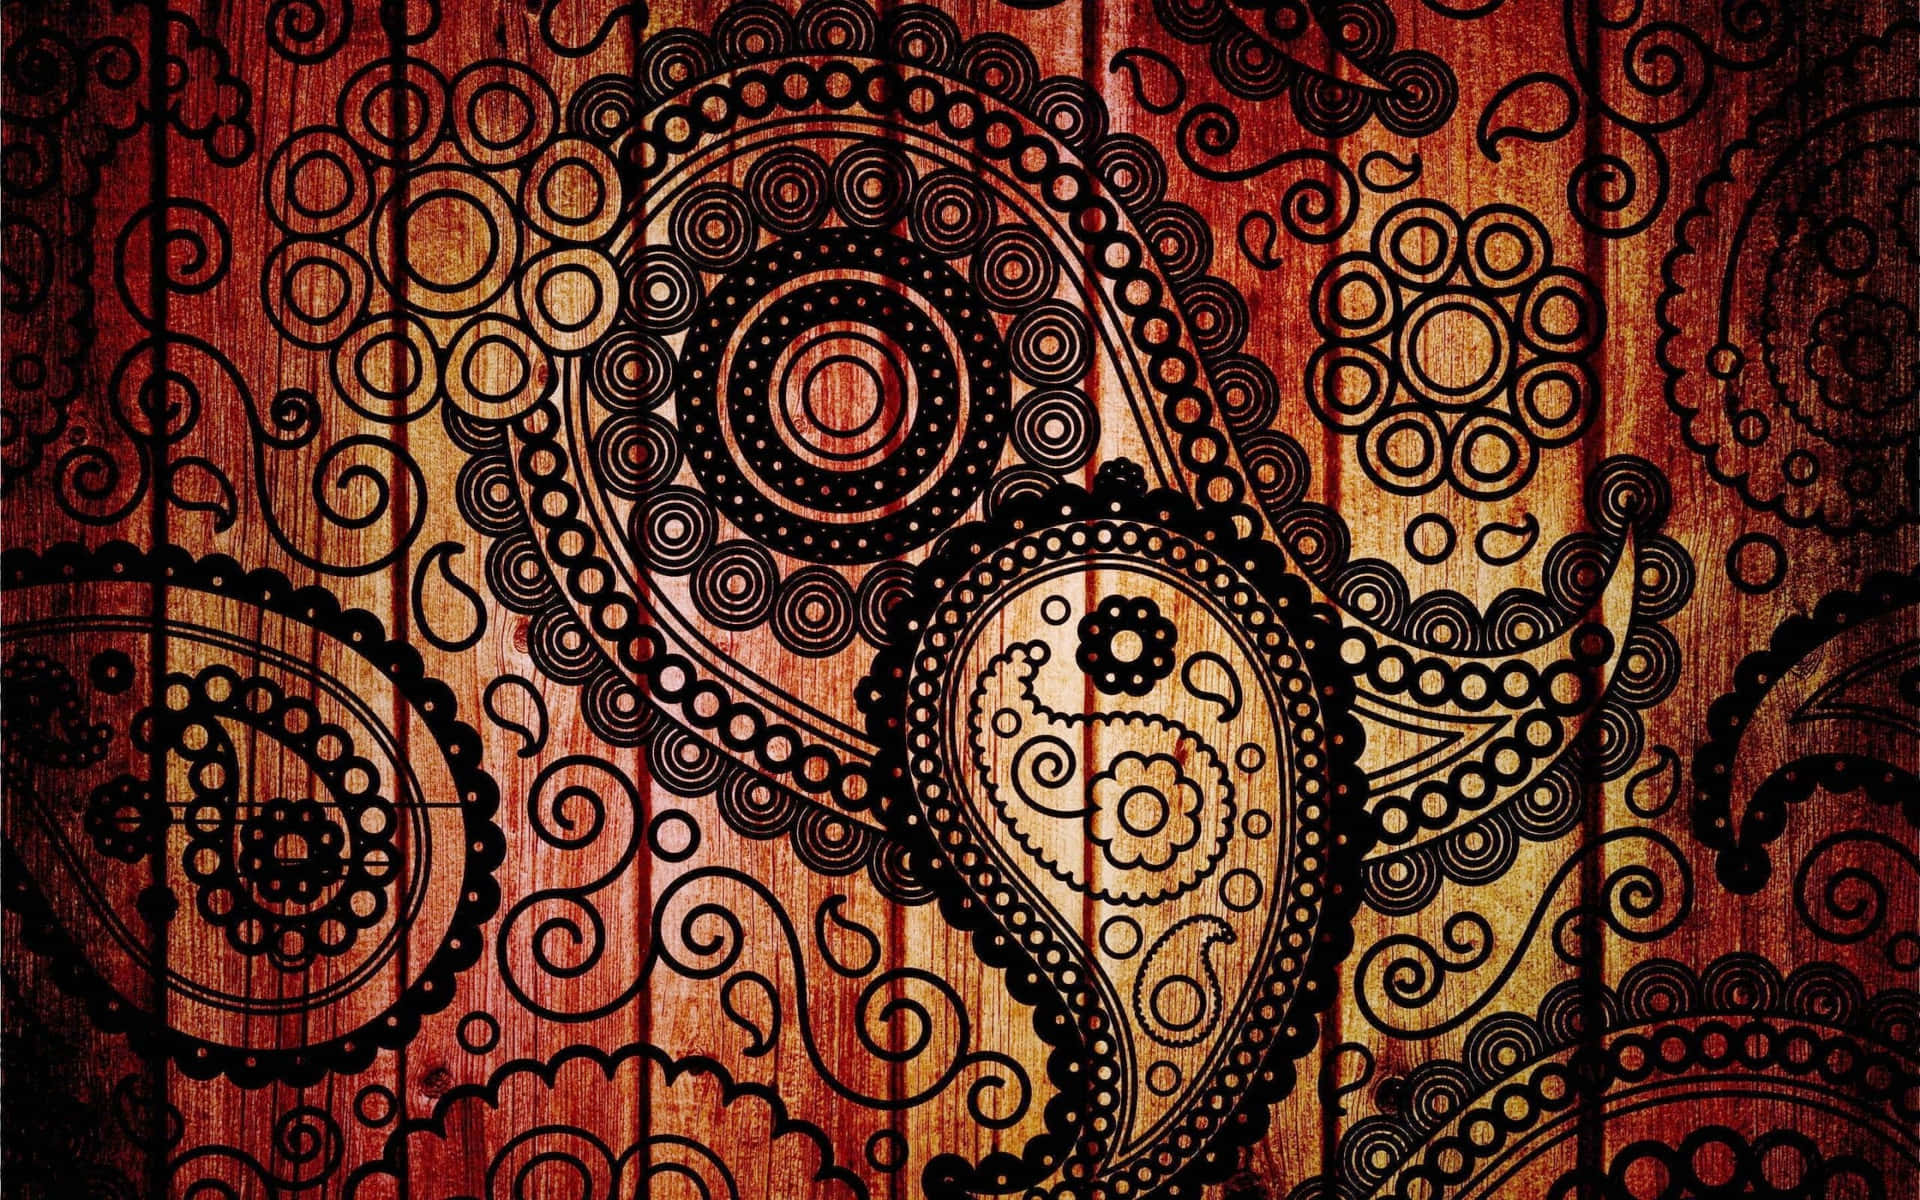 A Wooden Background With Paisley Designs